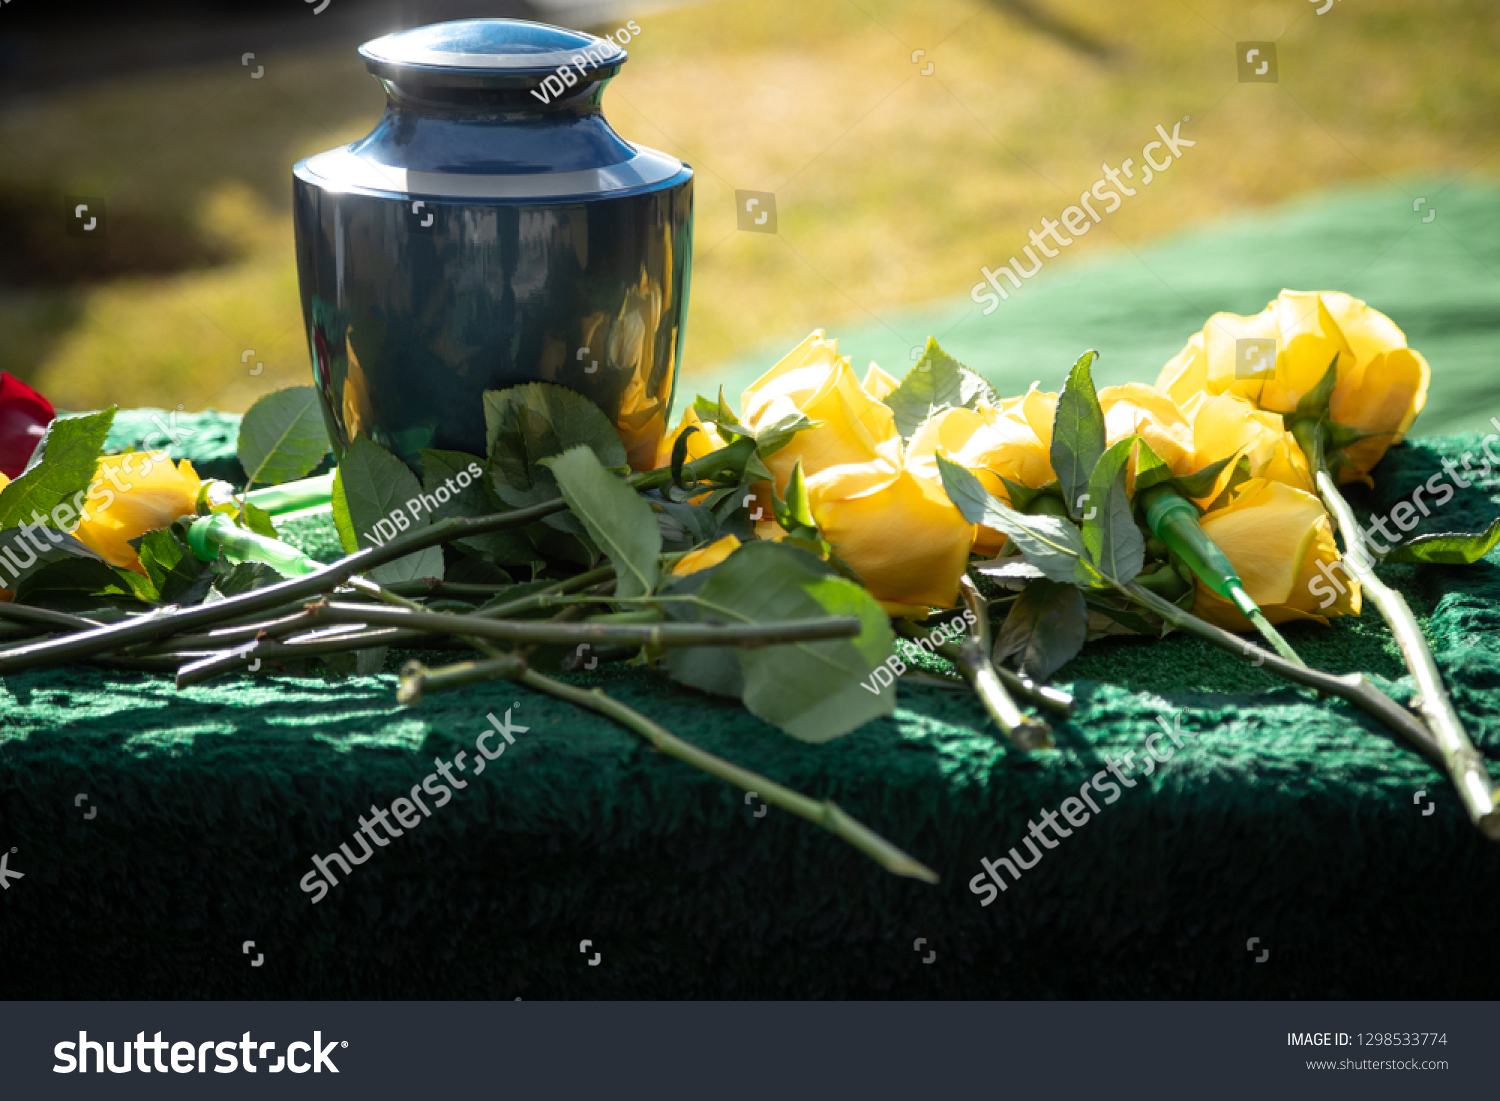 Ceramic burial urn with yellow roses, in a morning funeral scene, with space for text on the right #1298533774